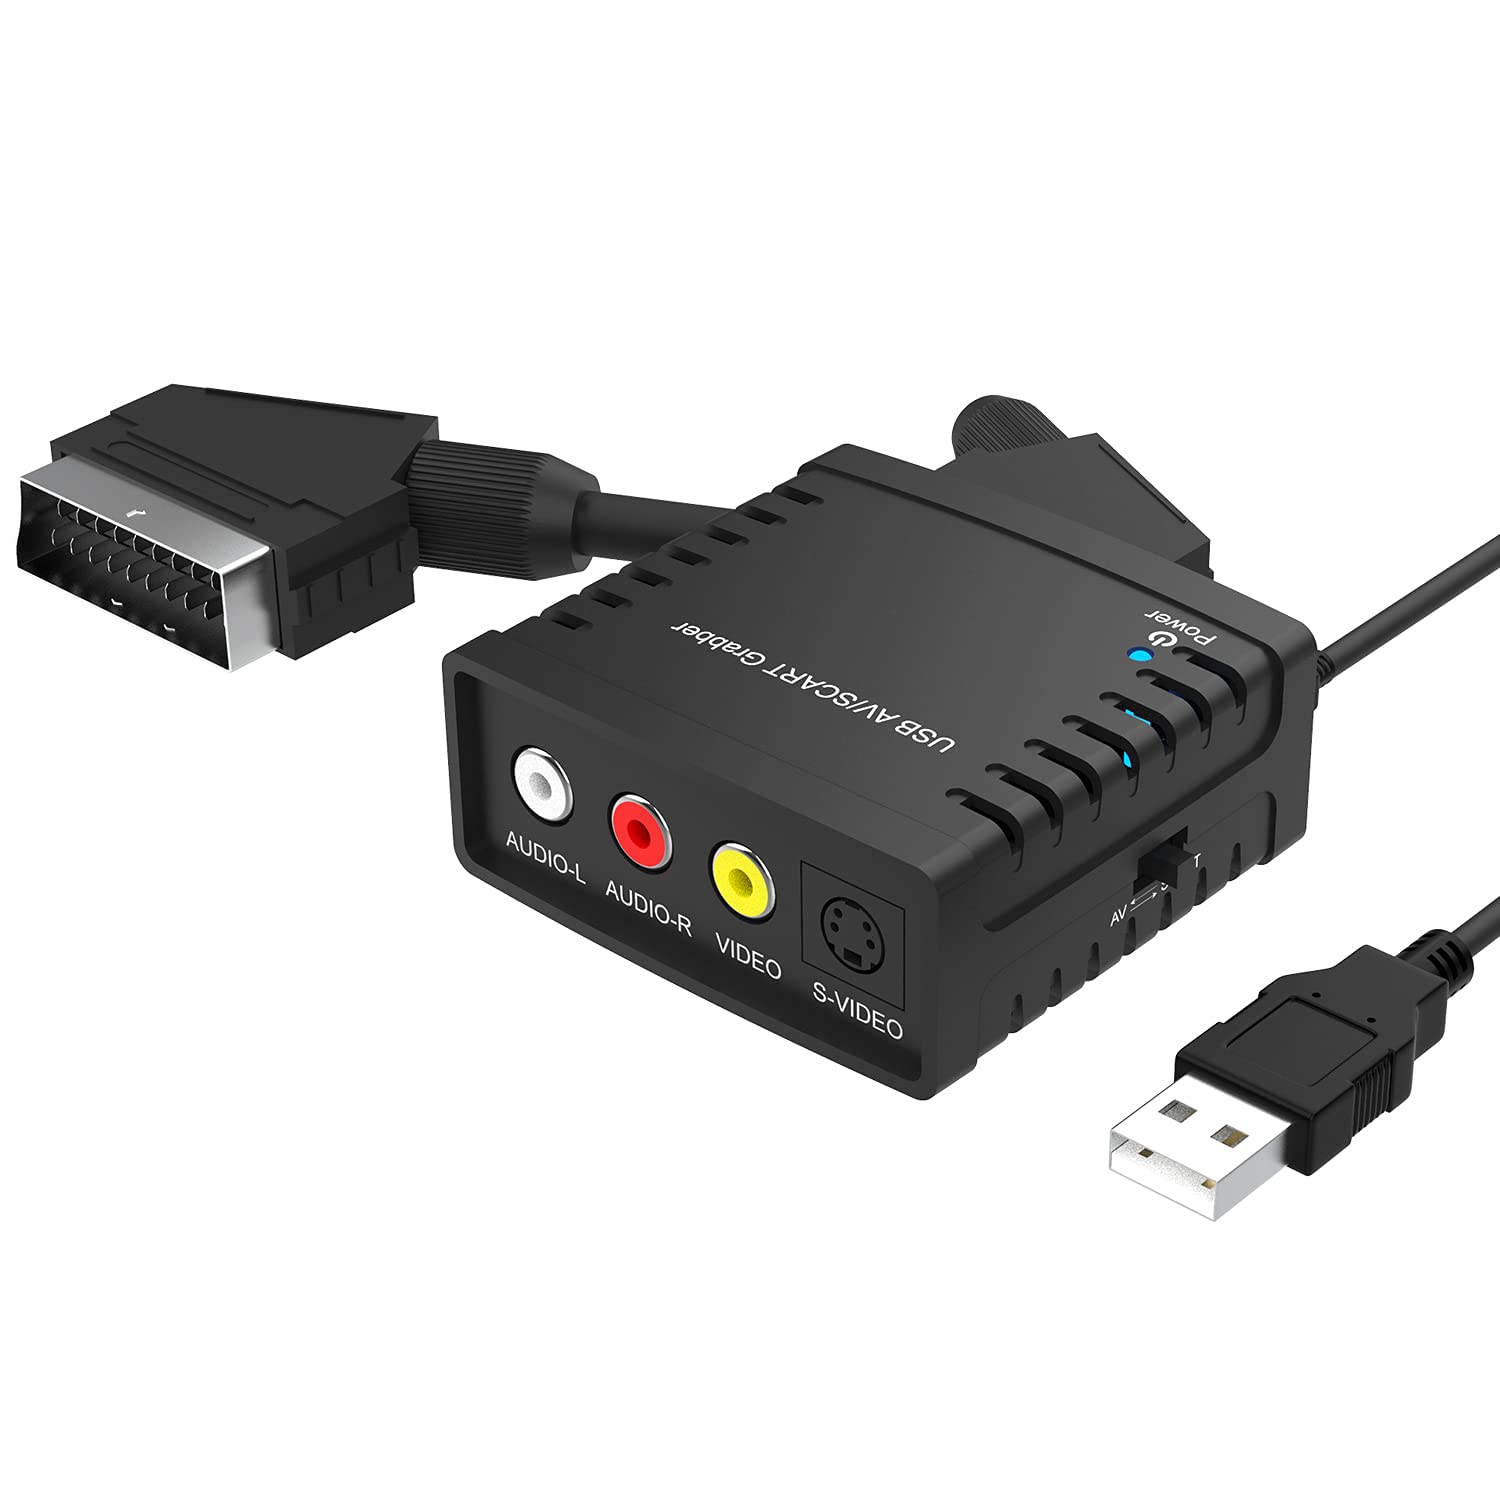 Video Grabber Capture Card Transfer TV / Hi8 / VHS to DVD, VHS Digital Converter with Scart Adaptor and RCA Cable